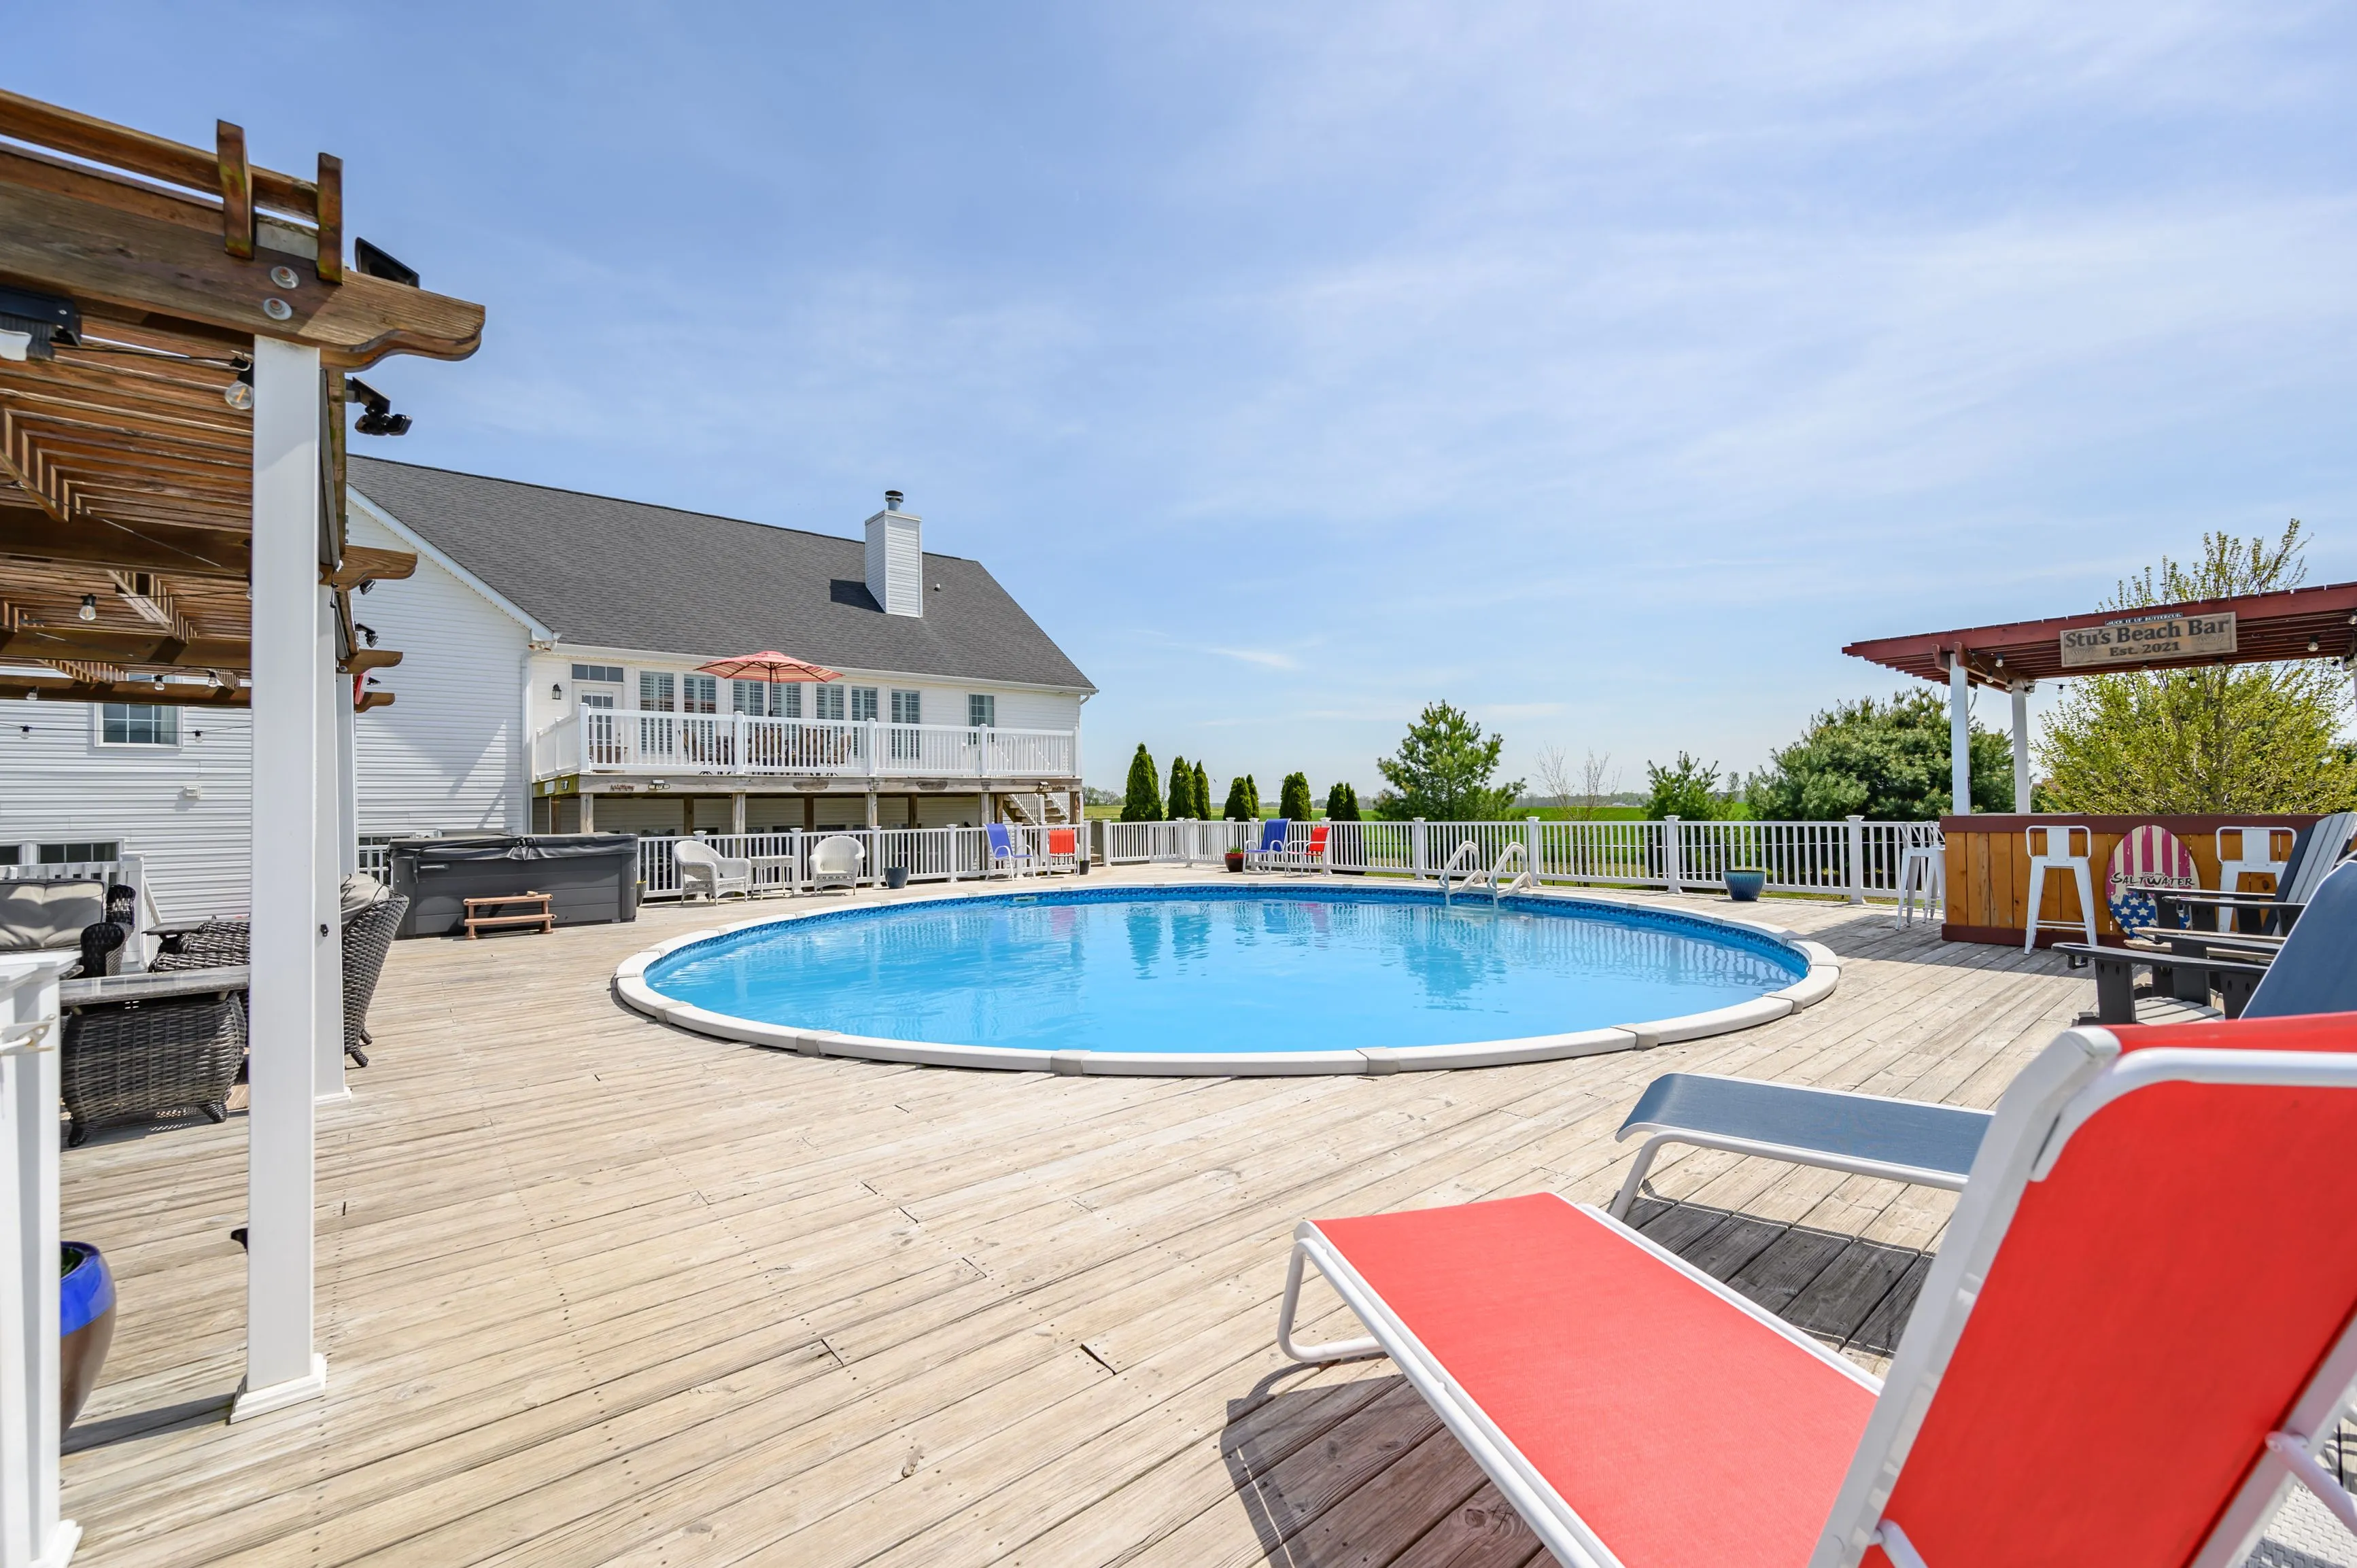 Spacious backyard with a large oval swimming pool, wooden deck, red sun loungers, and a two-story house in the background under a clear blue sky.